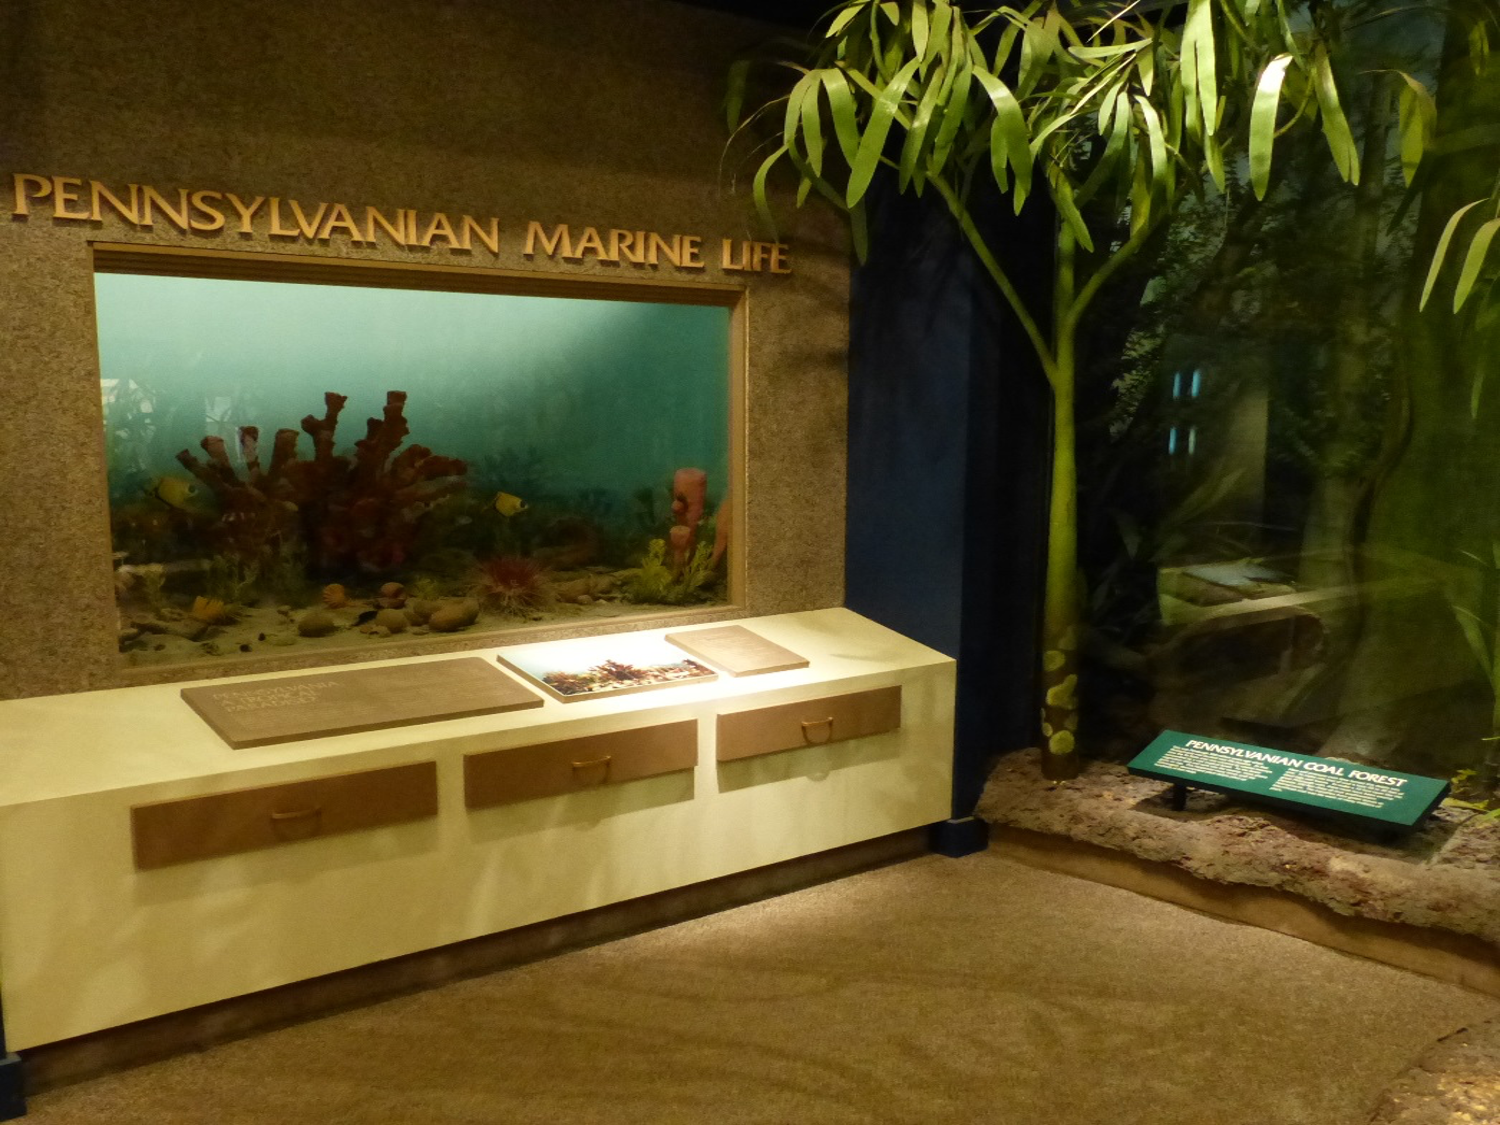 Exhibit labeled Pennsylvanian Marine Life. Below the sign is a diorama designed to look like an aquarium. 